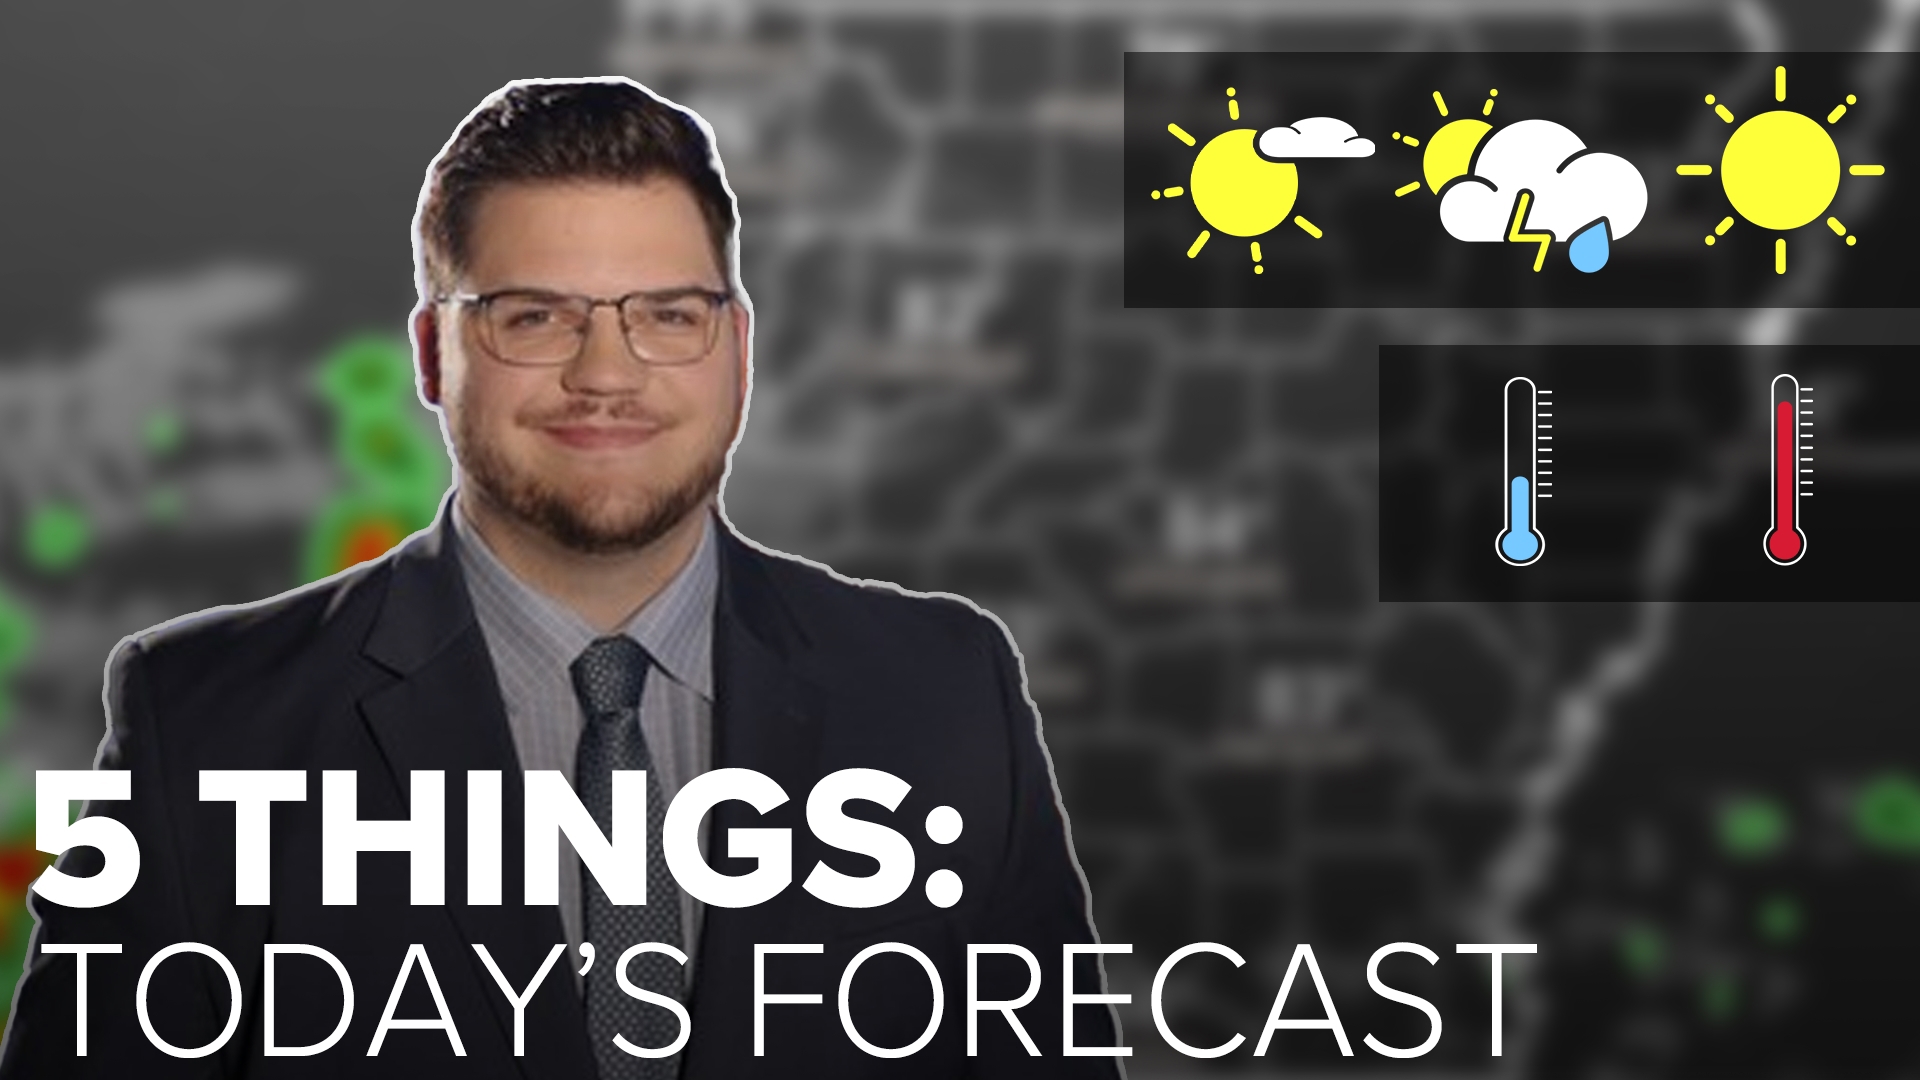 5NEWS Meteorologist Stephen Elmore is covering what you need to know about today's weather in our area.